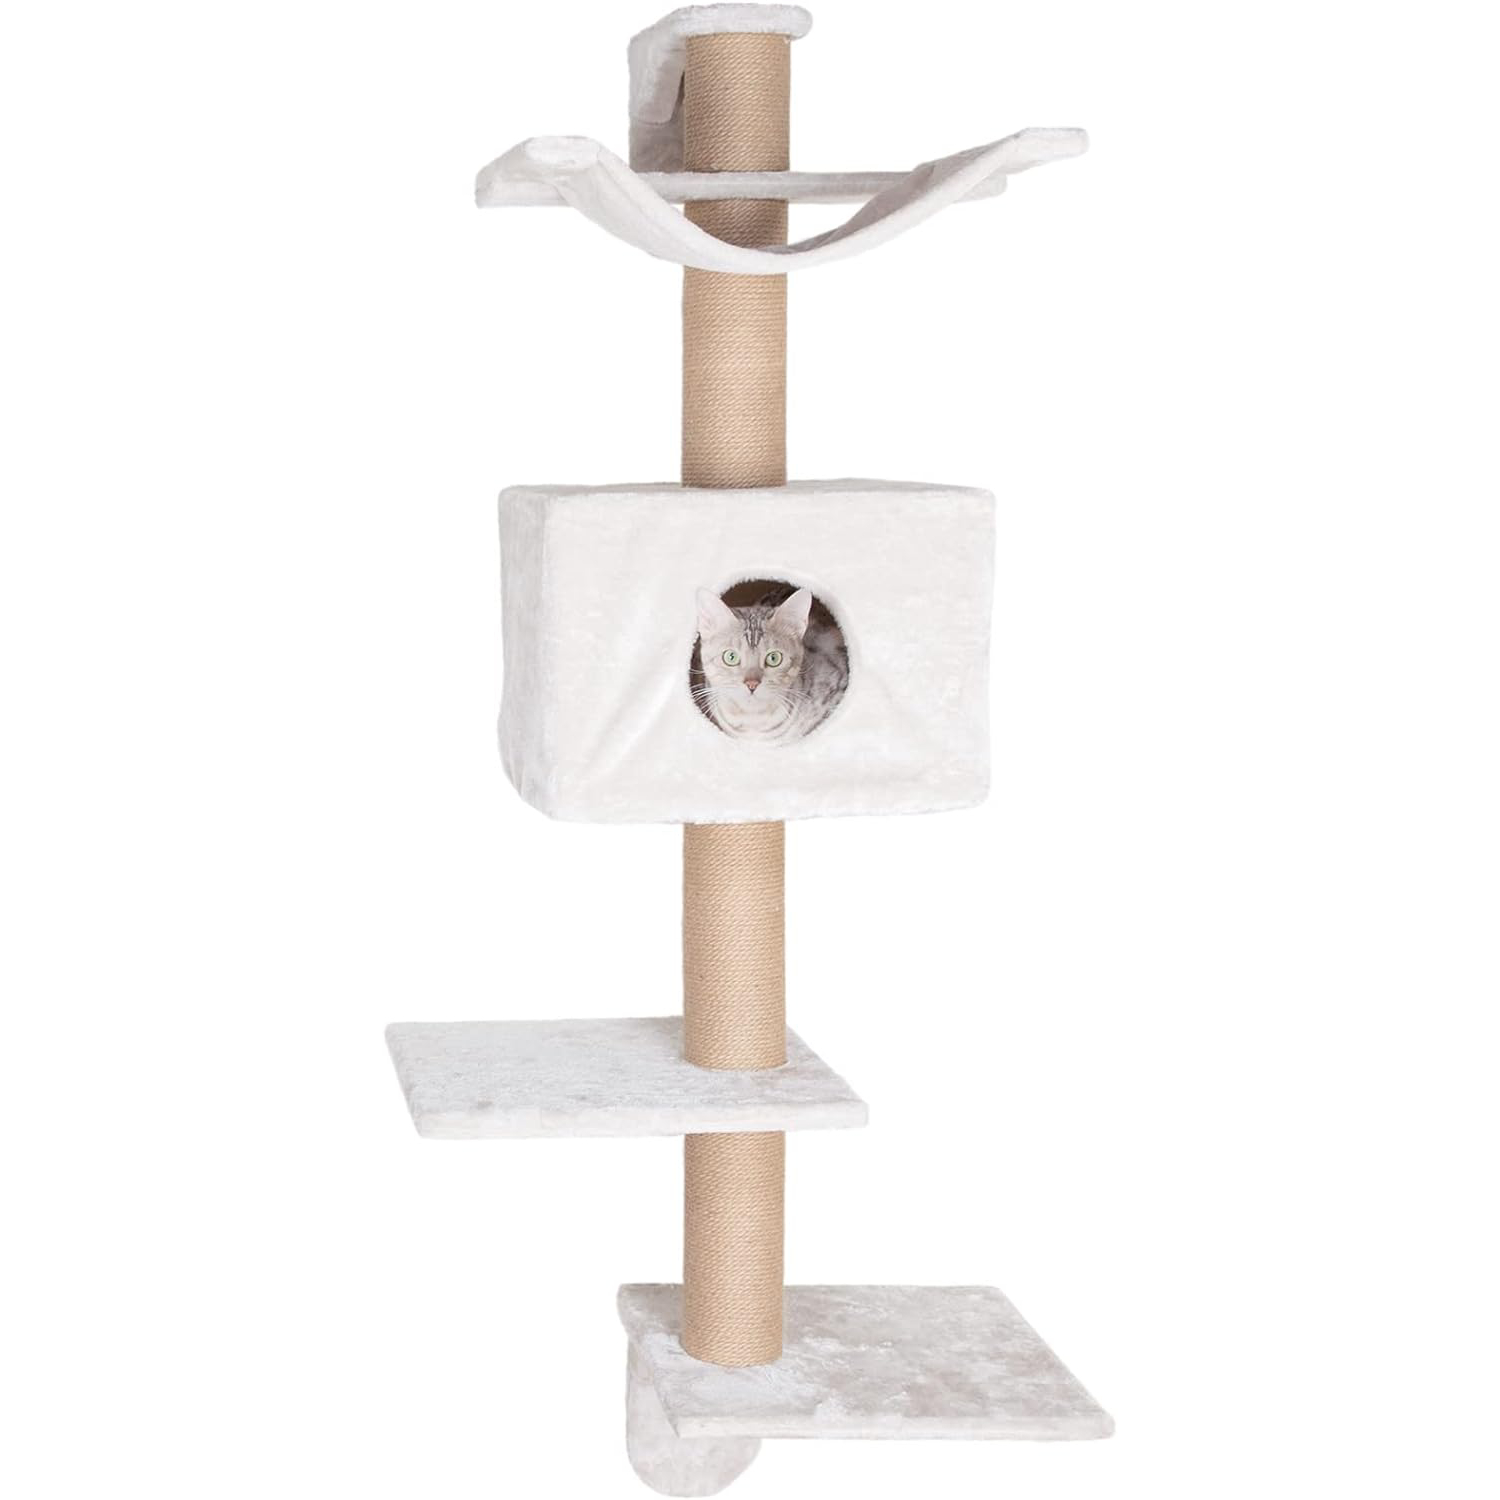 TRIXIE Dayna 59.8-in Wall Mounted Cat Tree with Scratching Posts, Condo, Hammock, and Two Platforms, Greige-Brown new